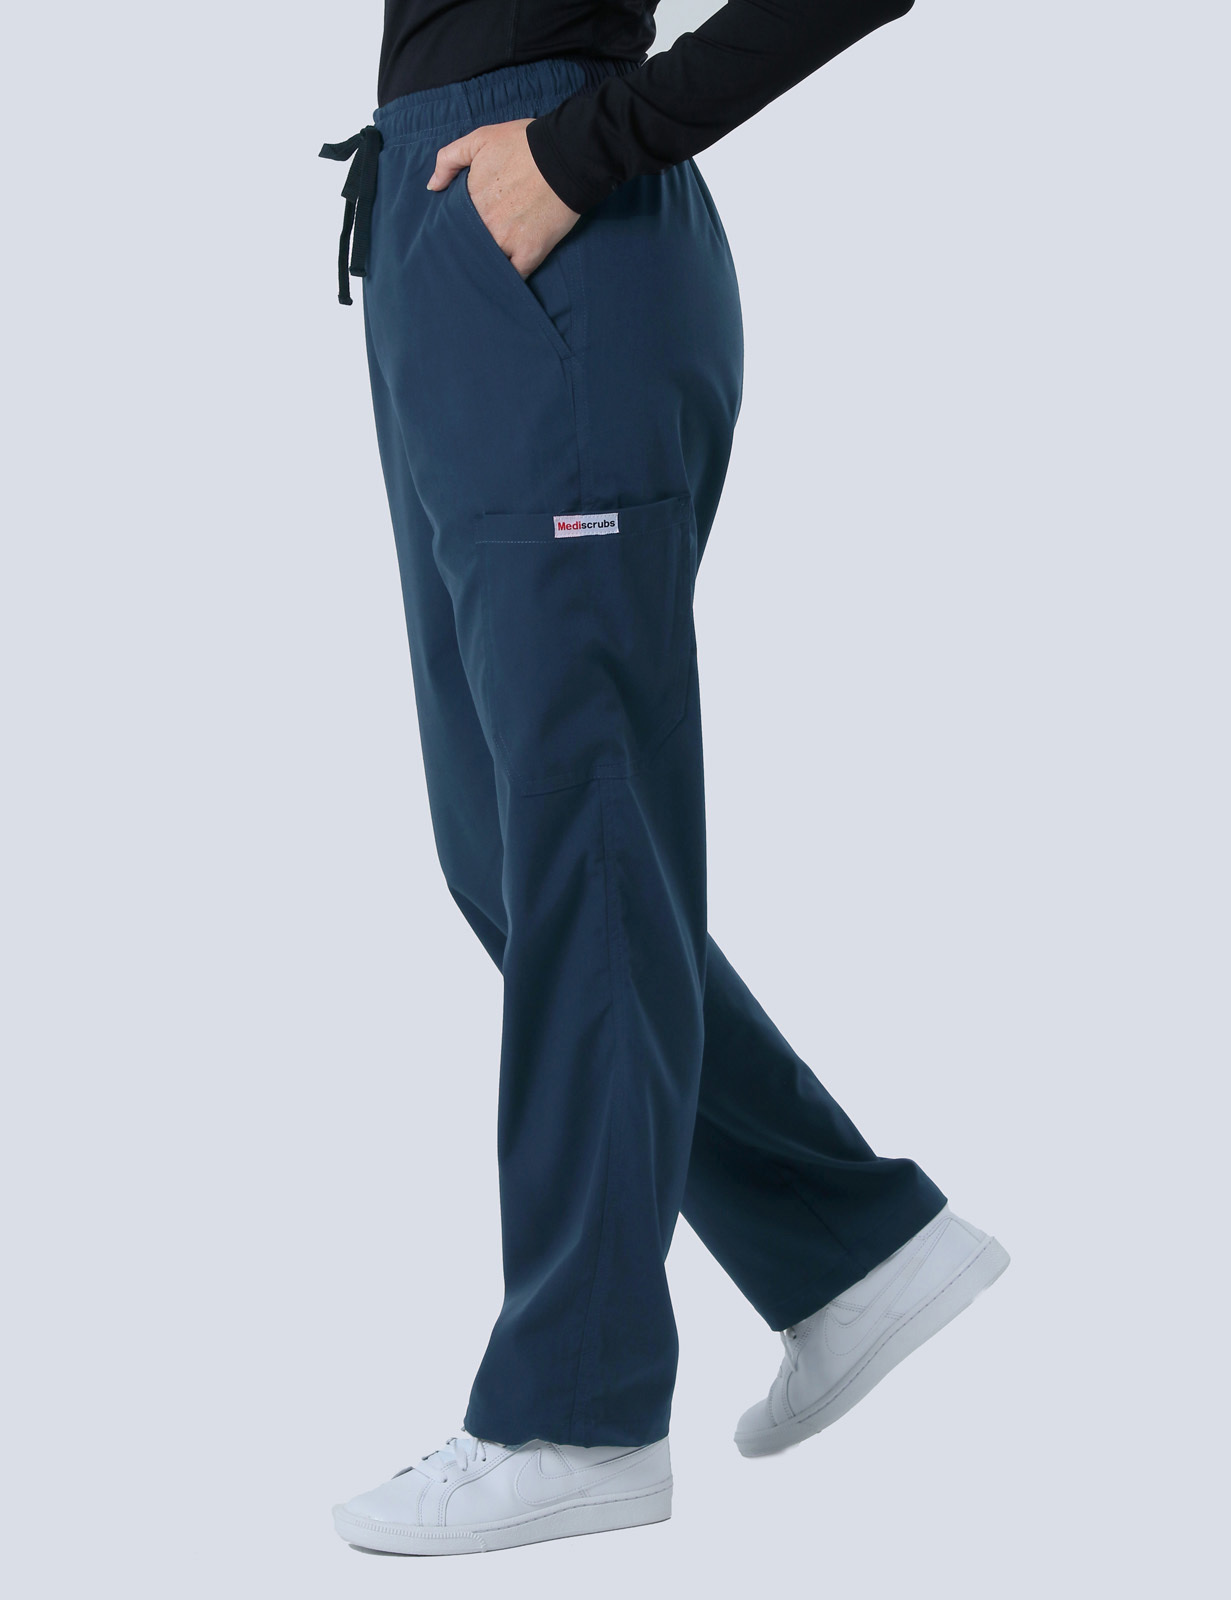 RBWH - Grantley Stable Neonatal Stable (Women's Fit Spandex Scrub Top and Cargo Pants in Navy incl Logos)